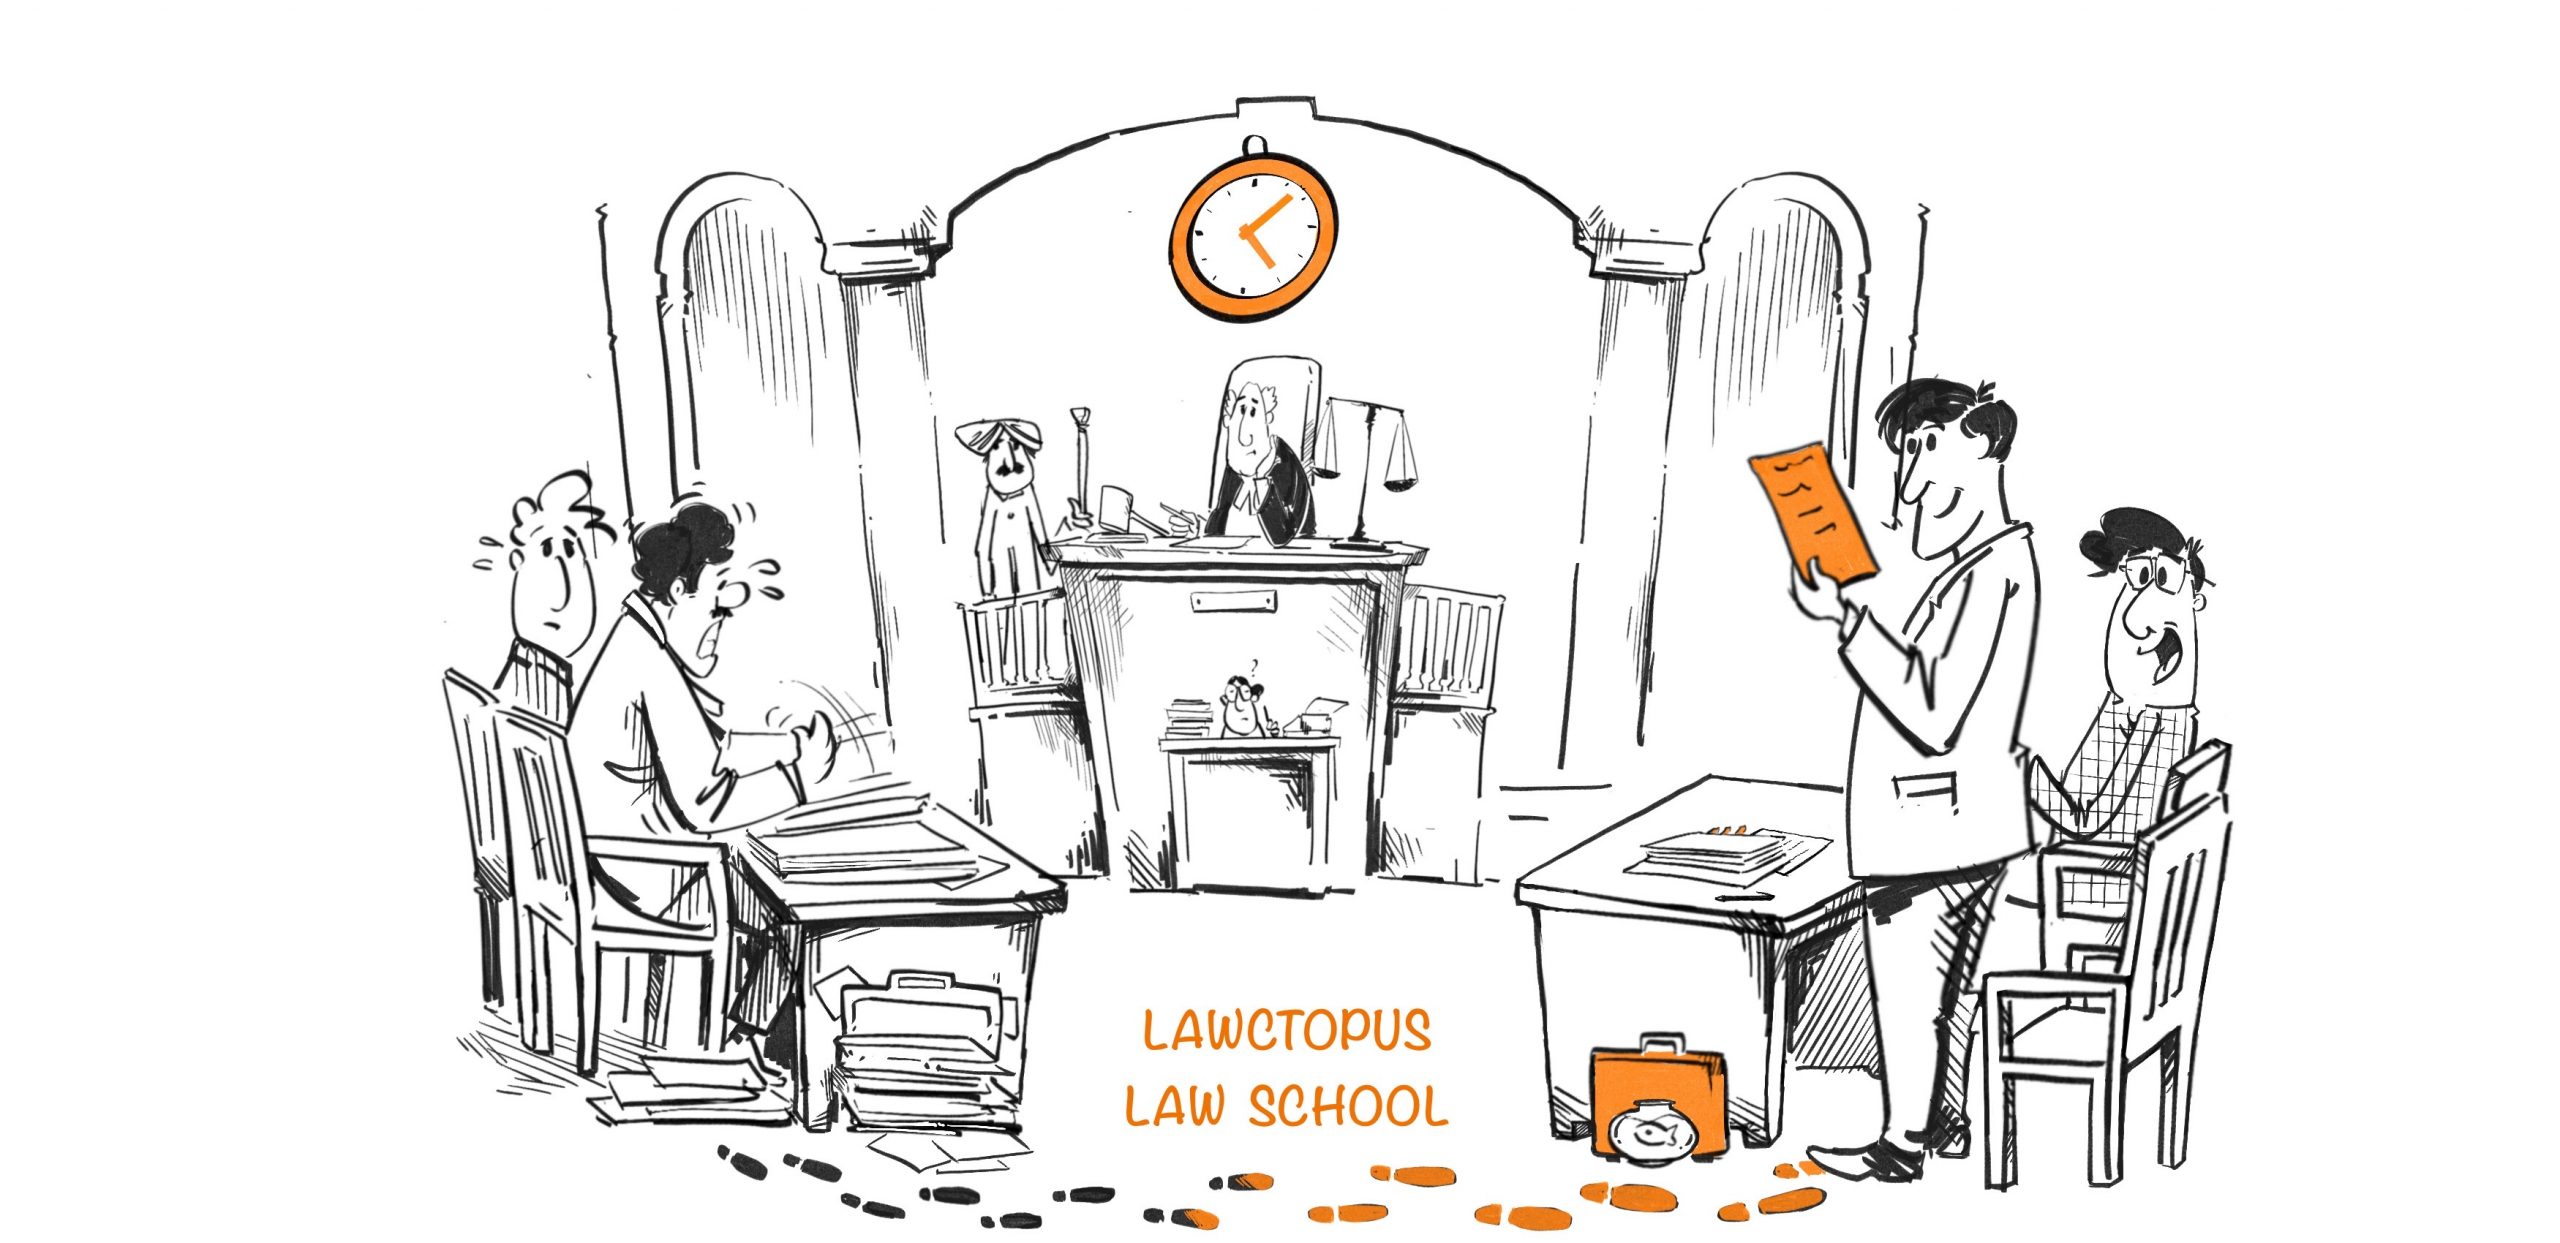 online course on litigation by lawctopus